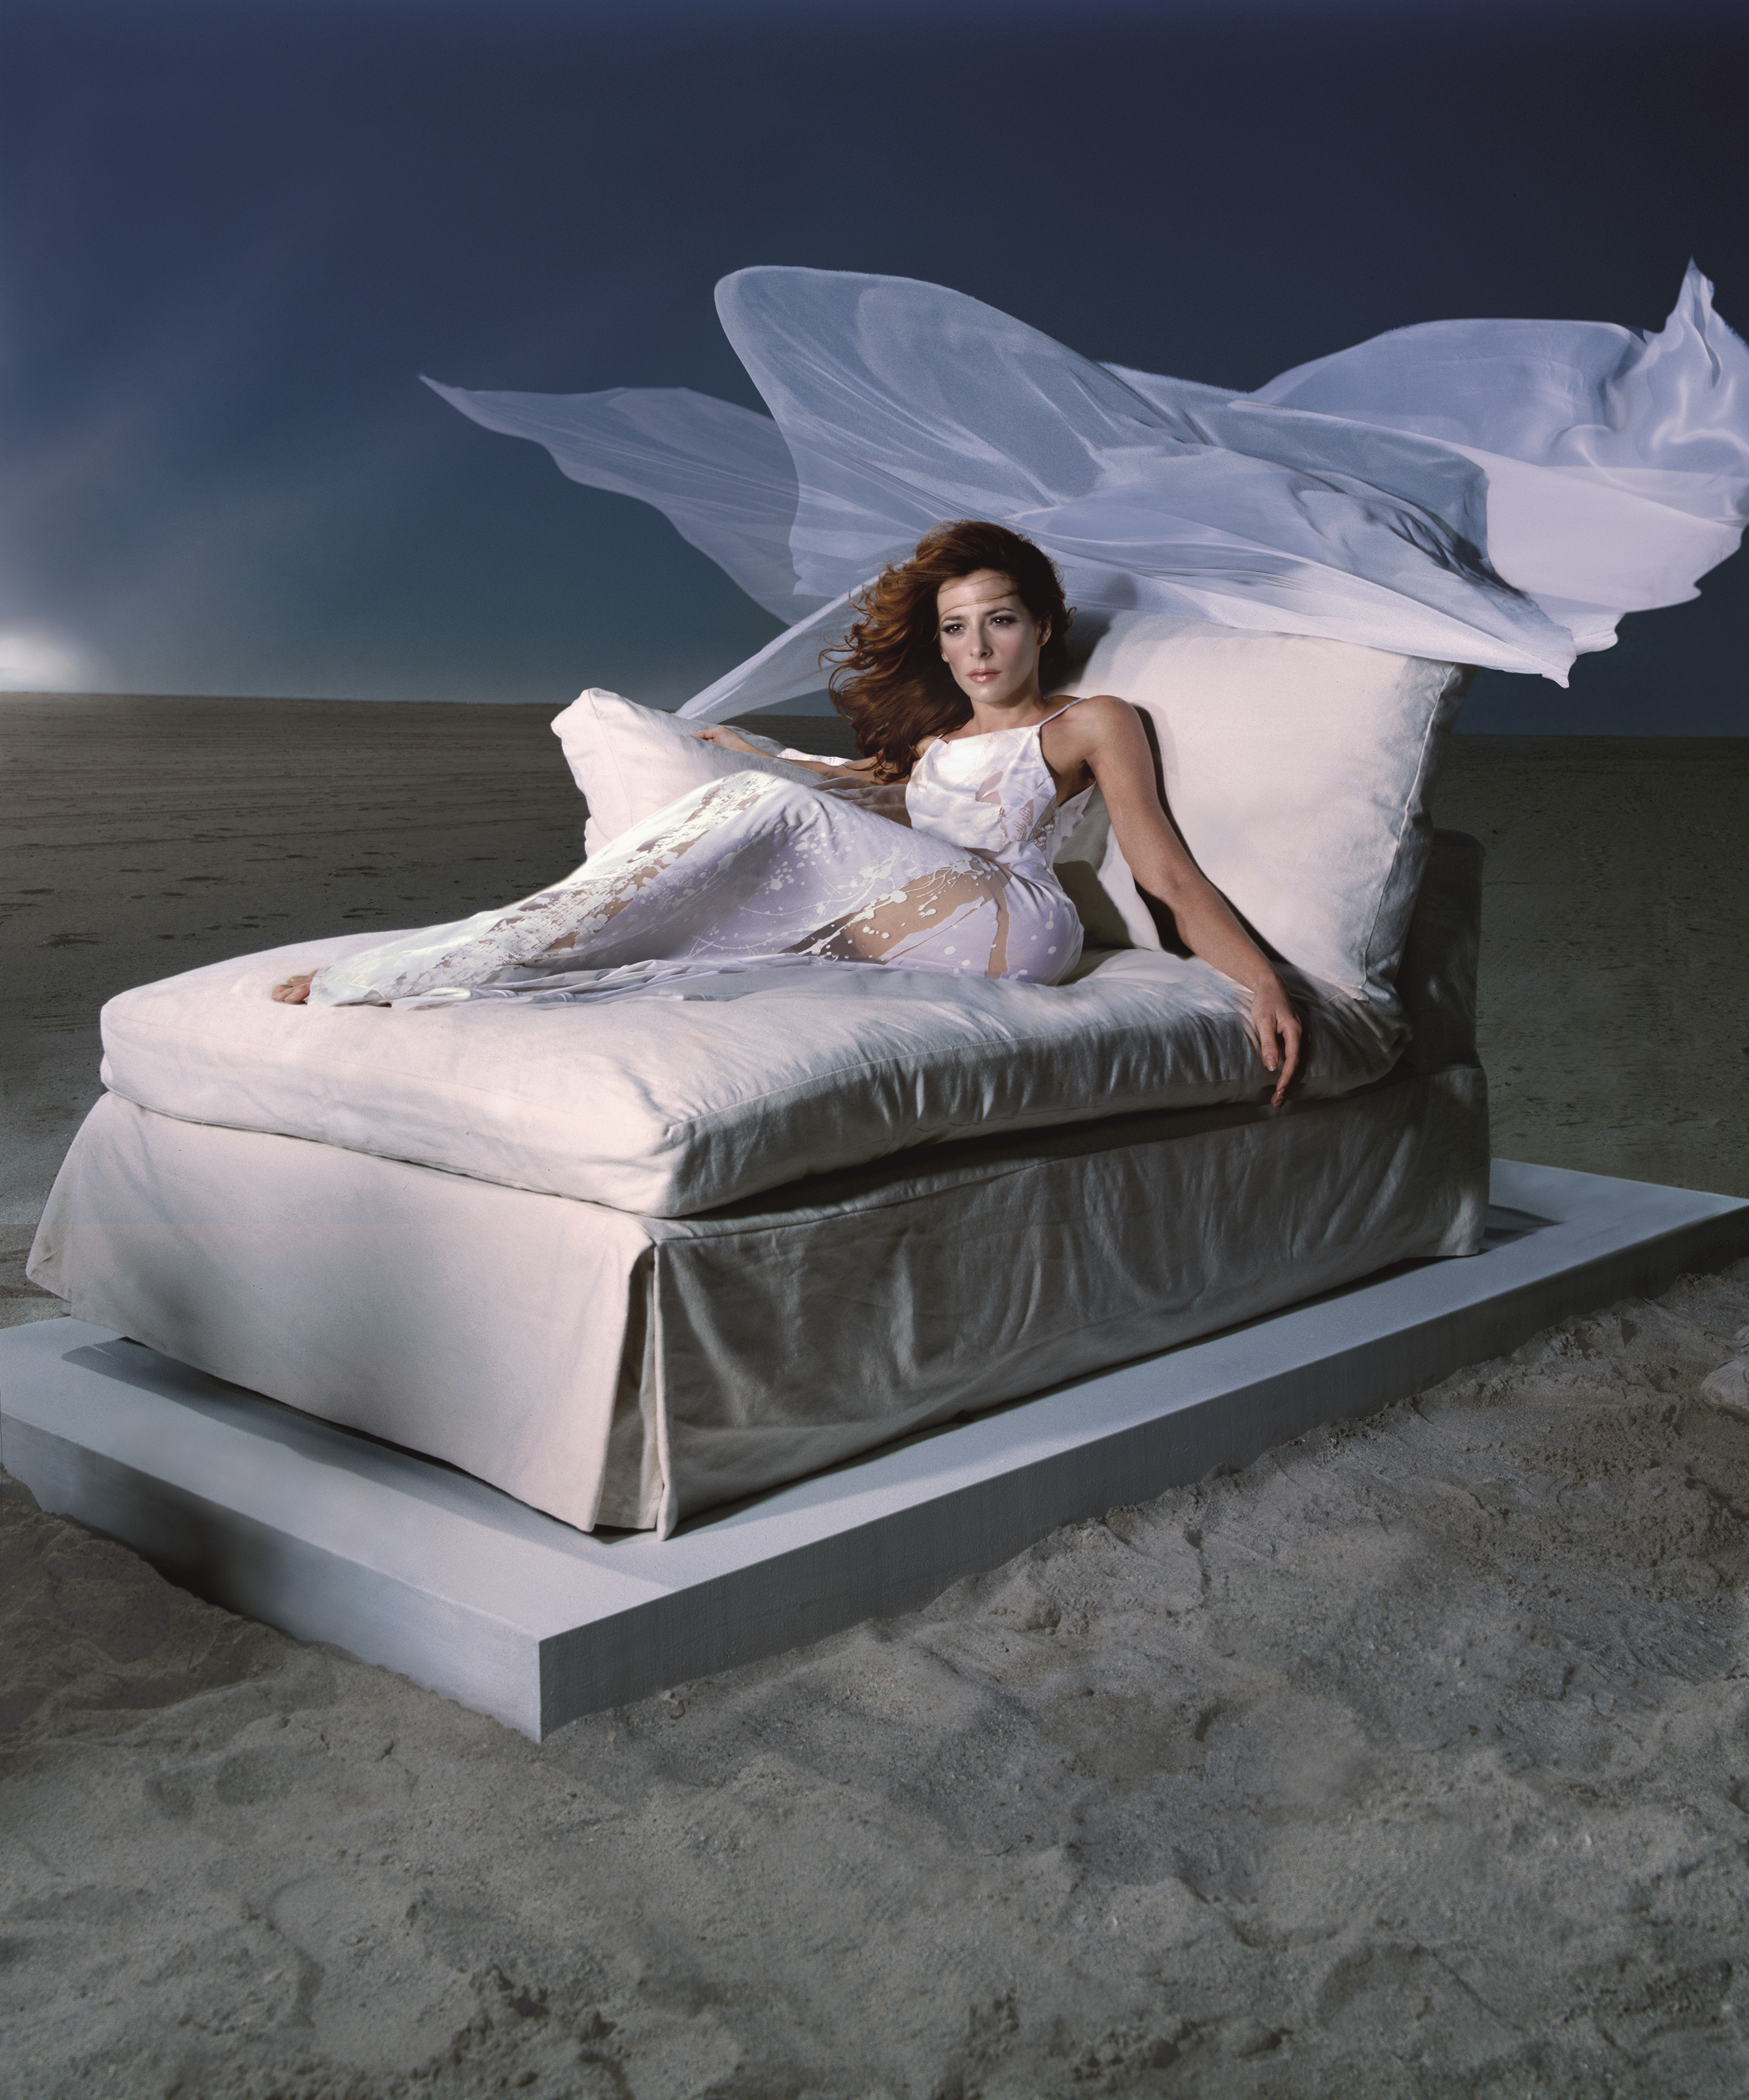 People 2674x3211 Mylène Farmer French singer redhead clear sky bed torn clothes women